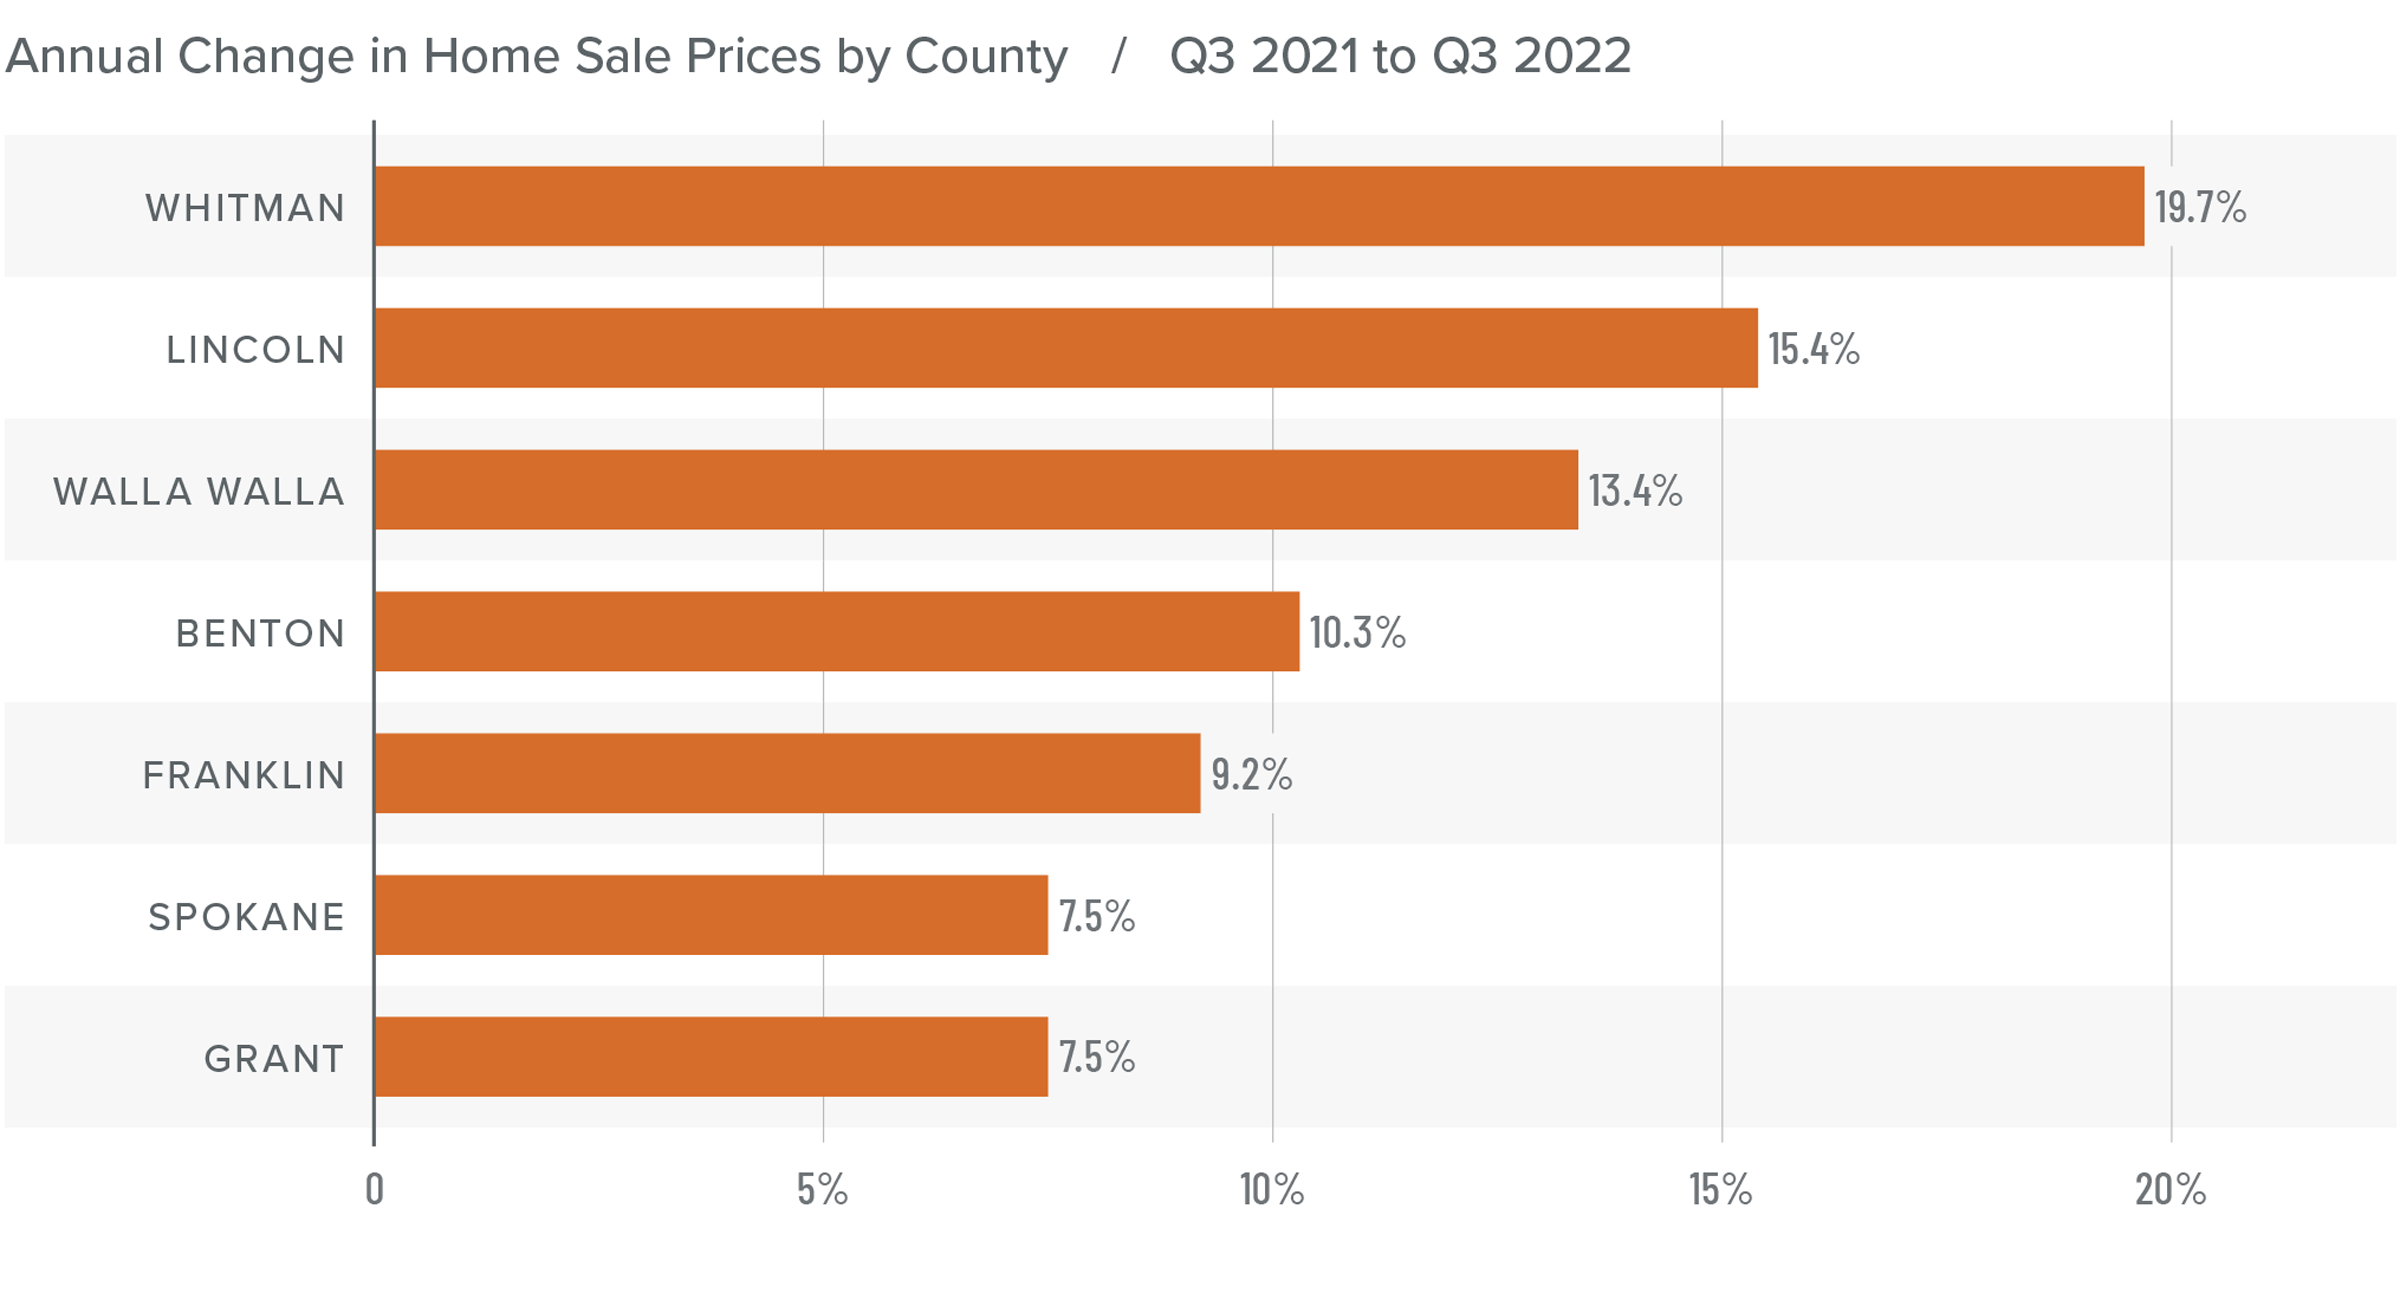 A bar graph showing the annual change in home sale prices for various counties in Eastern Washington from Q3 2021 to Q3 2022. Whitman County tops the list at 19.7%, followed by Lincoln at 15.4%, Walla Walla at 13.4%, Benton at 10.3%, Franklin at 9.2%, and Spokane and Grant at 7.5%.